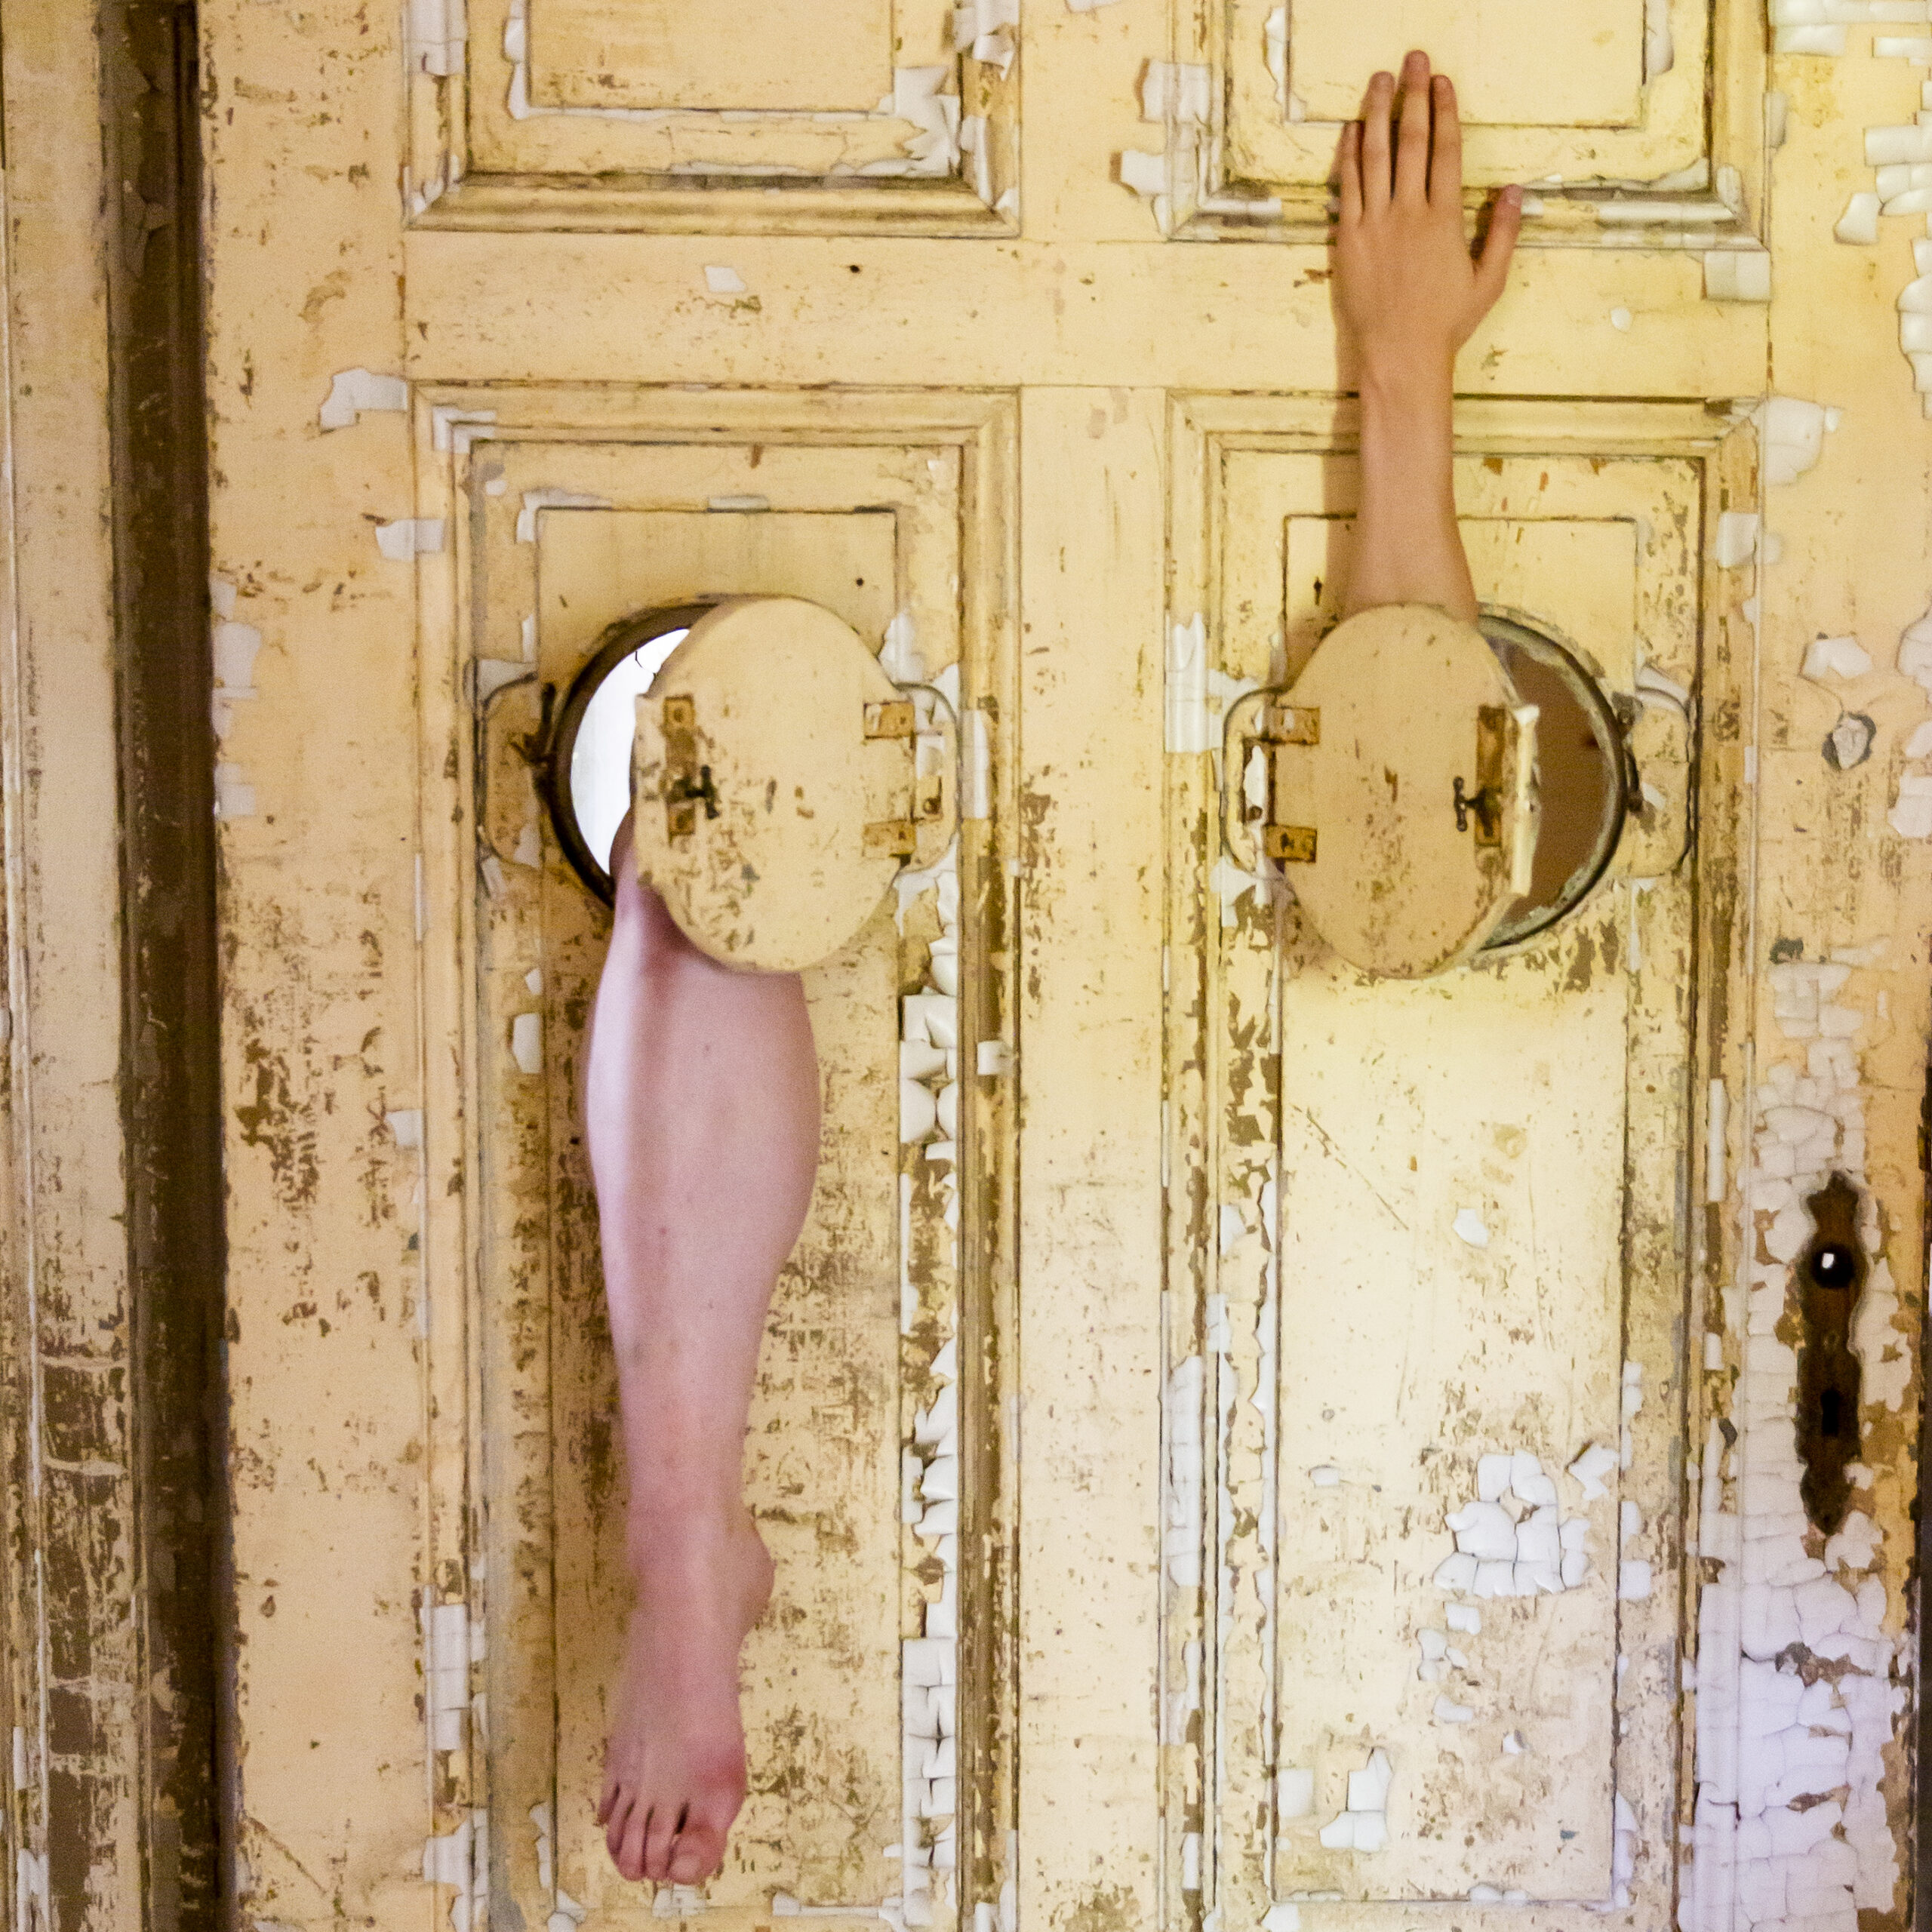 Young artist Merle Sommermeier hanging on door in an abandoned building, only with a visible hand and leg.